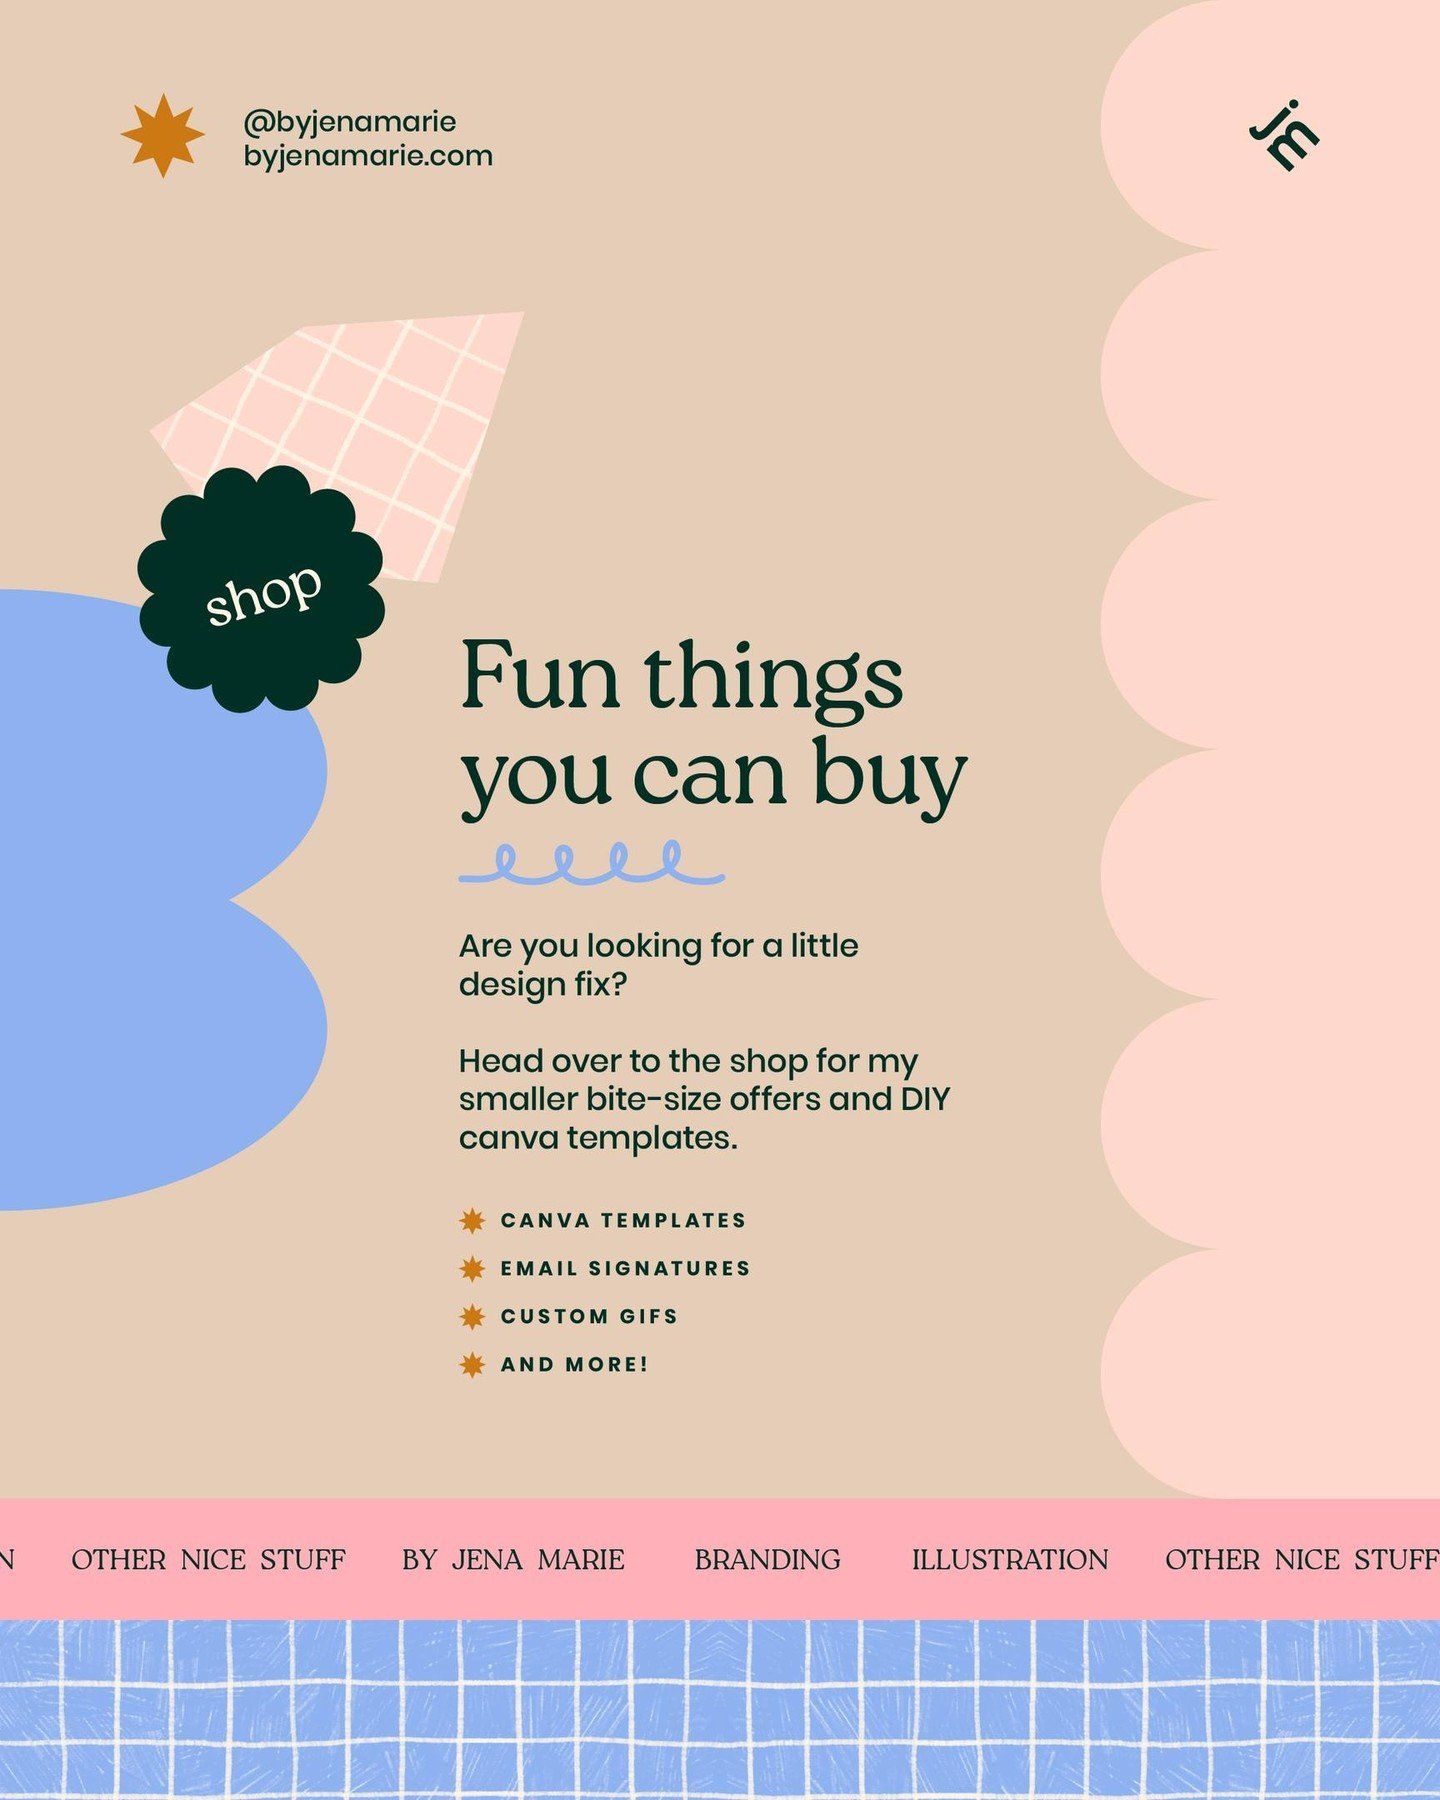 Are you looking for a little design fix? ⁠
⁠
Head over to the shop for my smaller bite-size offers and DIY canva templates. Canva templates, email signatures, custom gifs and more!⁠
⁠
Image description: Fun things you can buy. Are you looking for a l